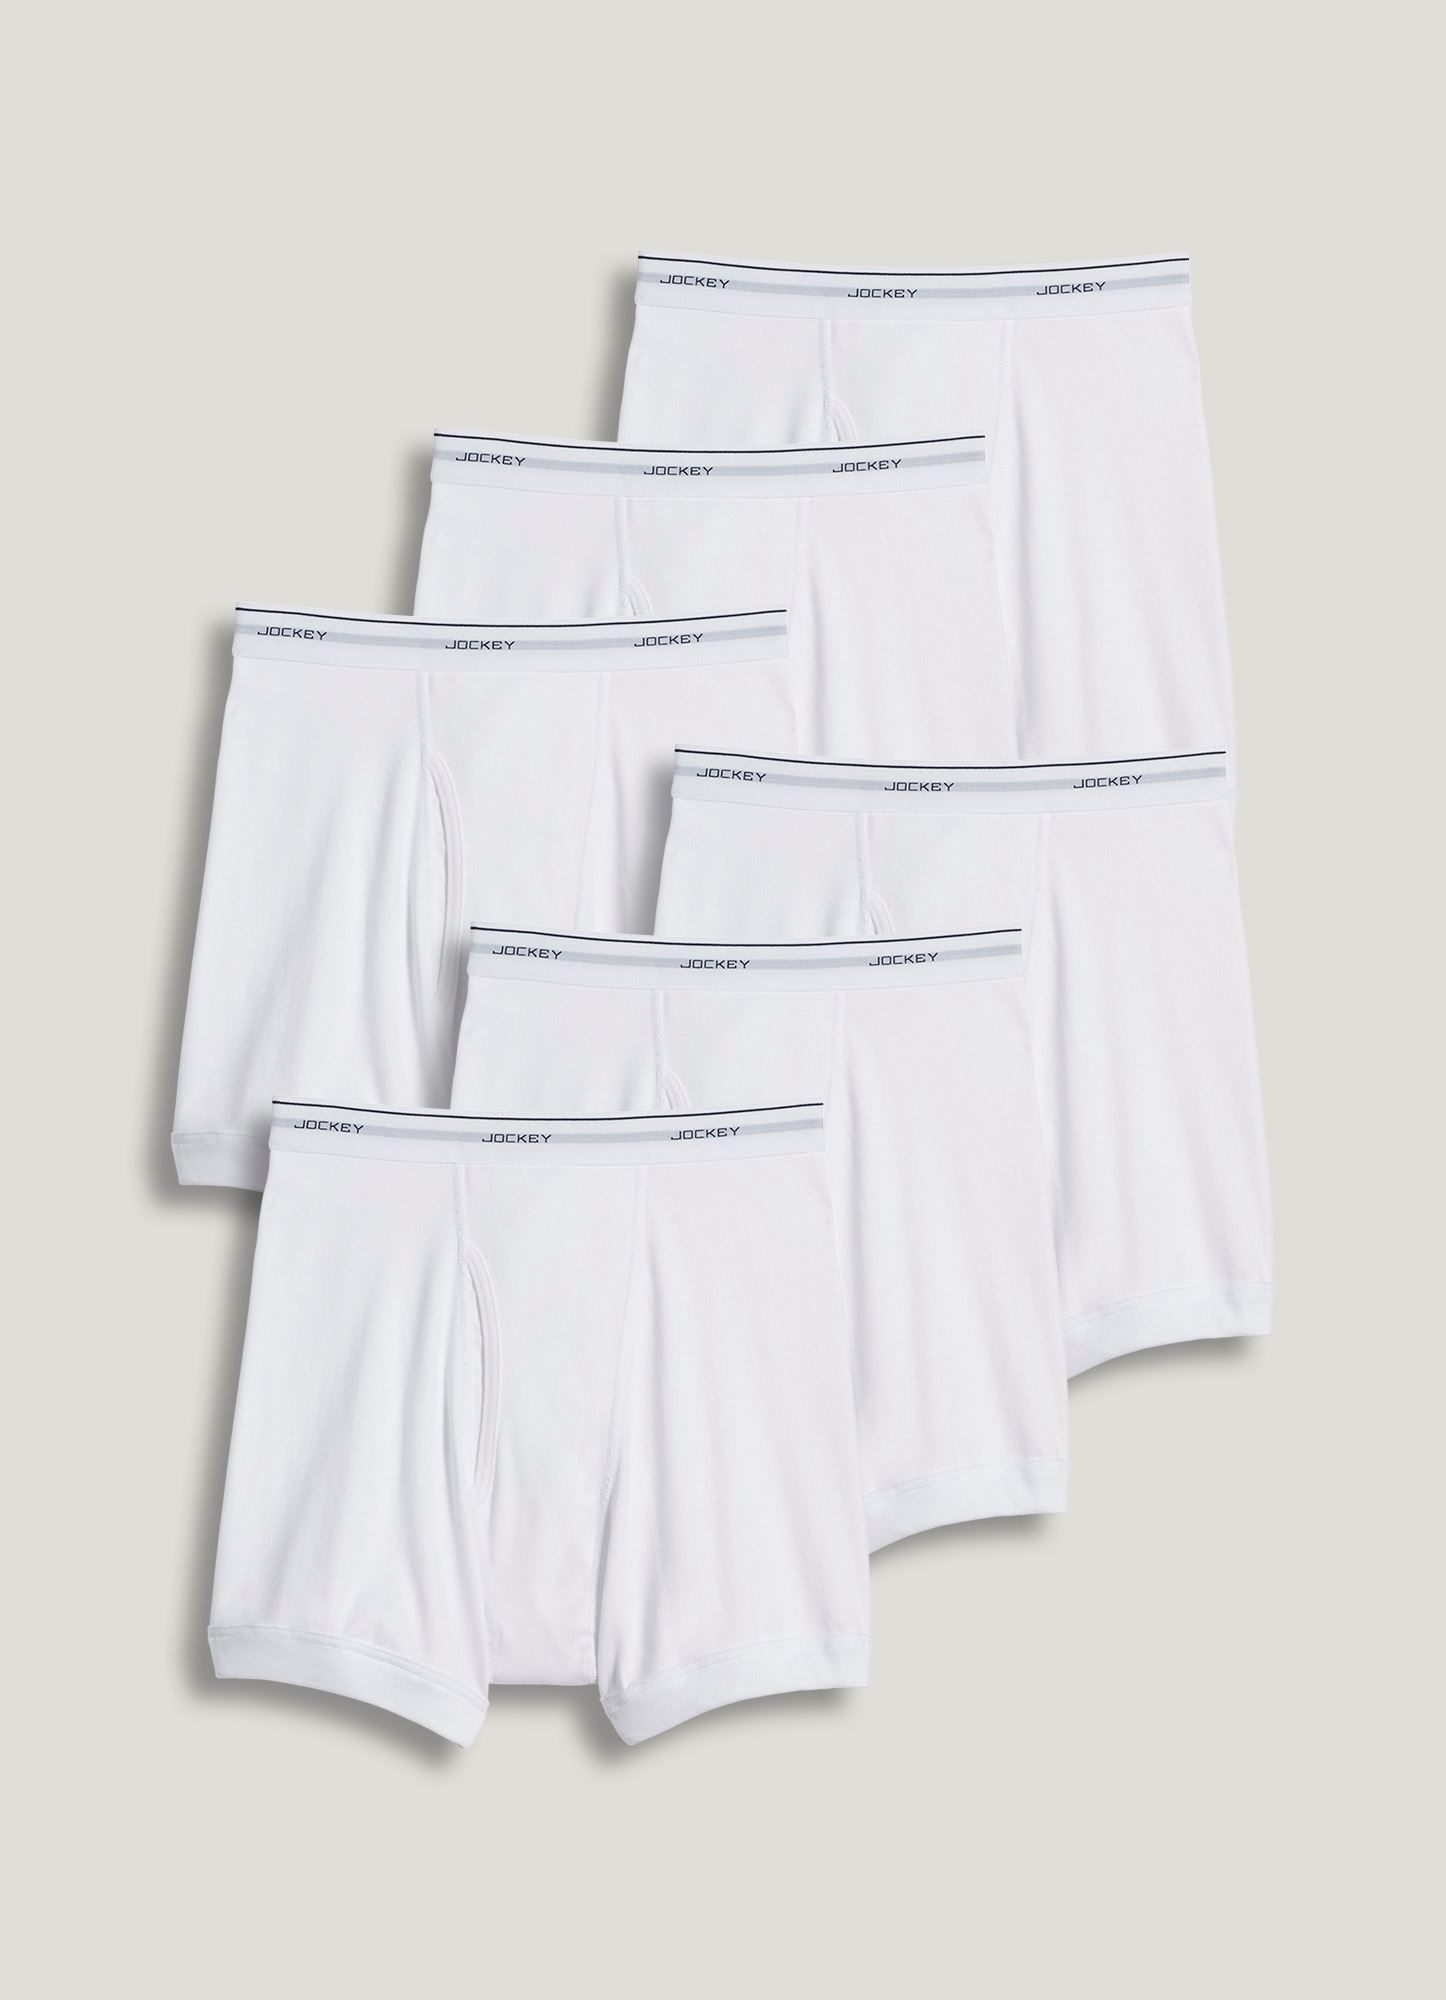 1987 Jockey Classic Briefs 3 Pack White Underwear Y-front Cotton Size 40  Sealed in Package Combed Cotton Basic Drawers -  Canada